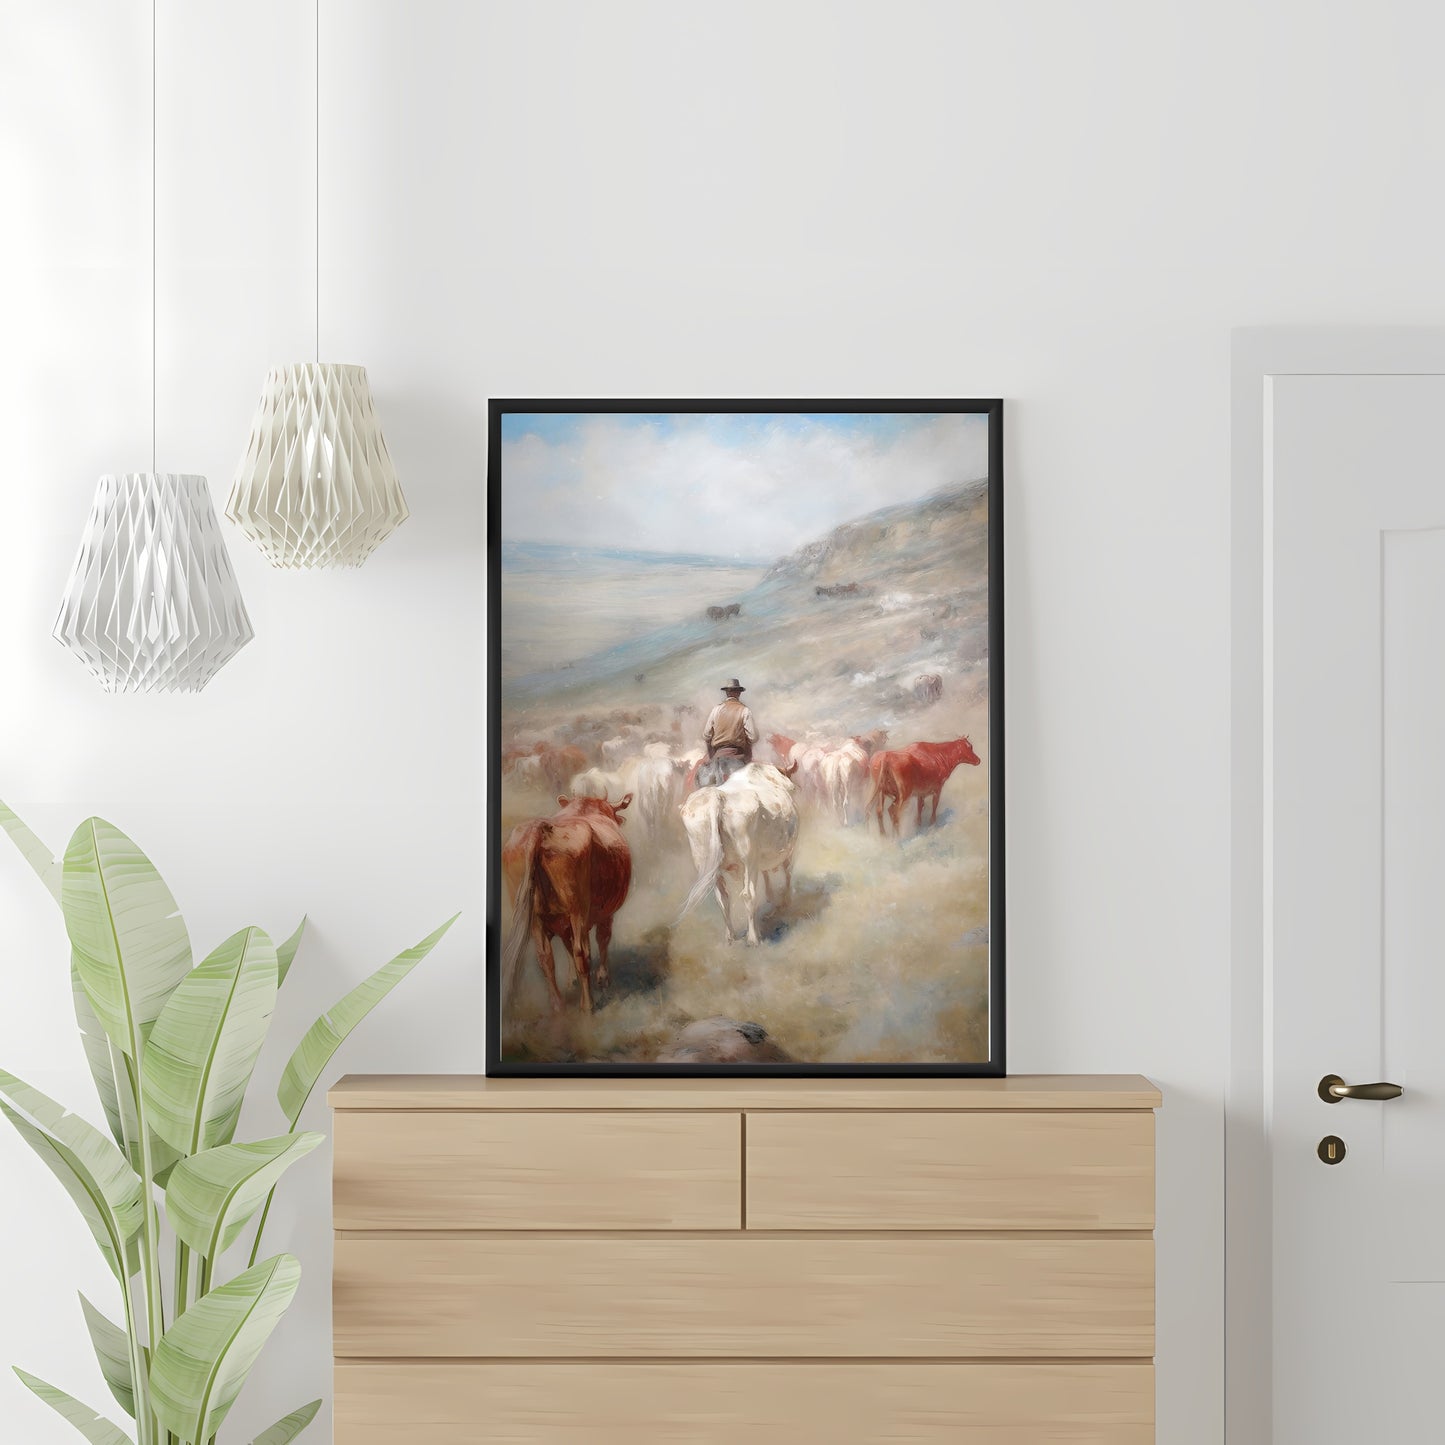 Vintage Wild West Paper Poster Prints Wall Art Cowboy Tending Cattle Herd Down into Valley, Soft Pale Colors, Wild West Art